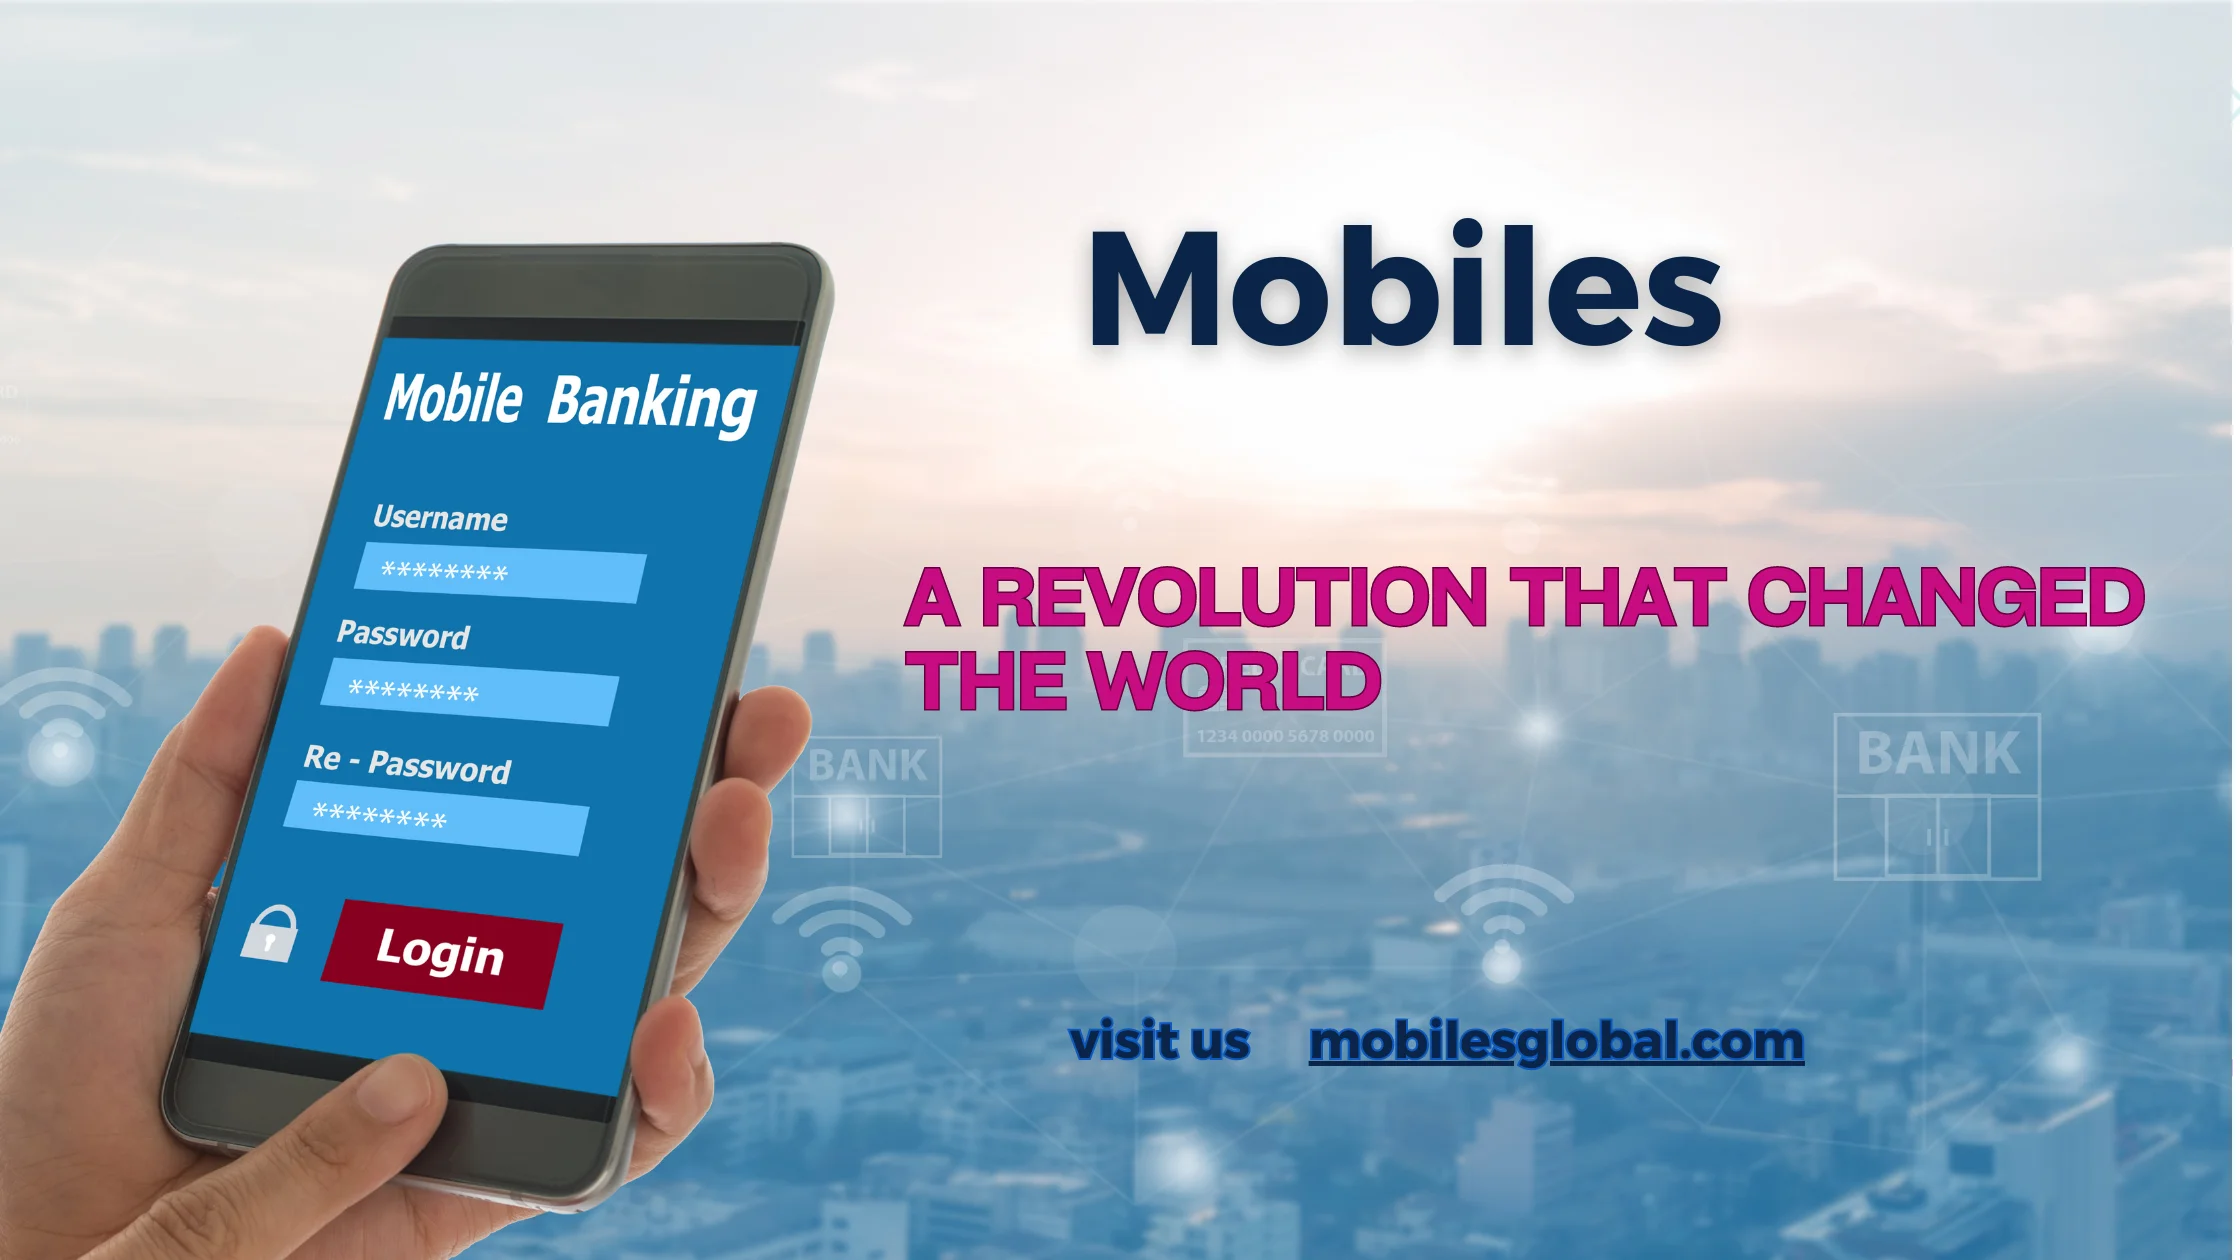 Mobiles: A Revolution That Changed the World